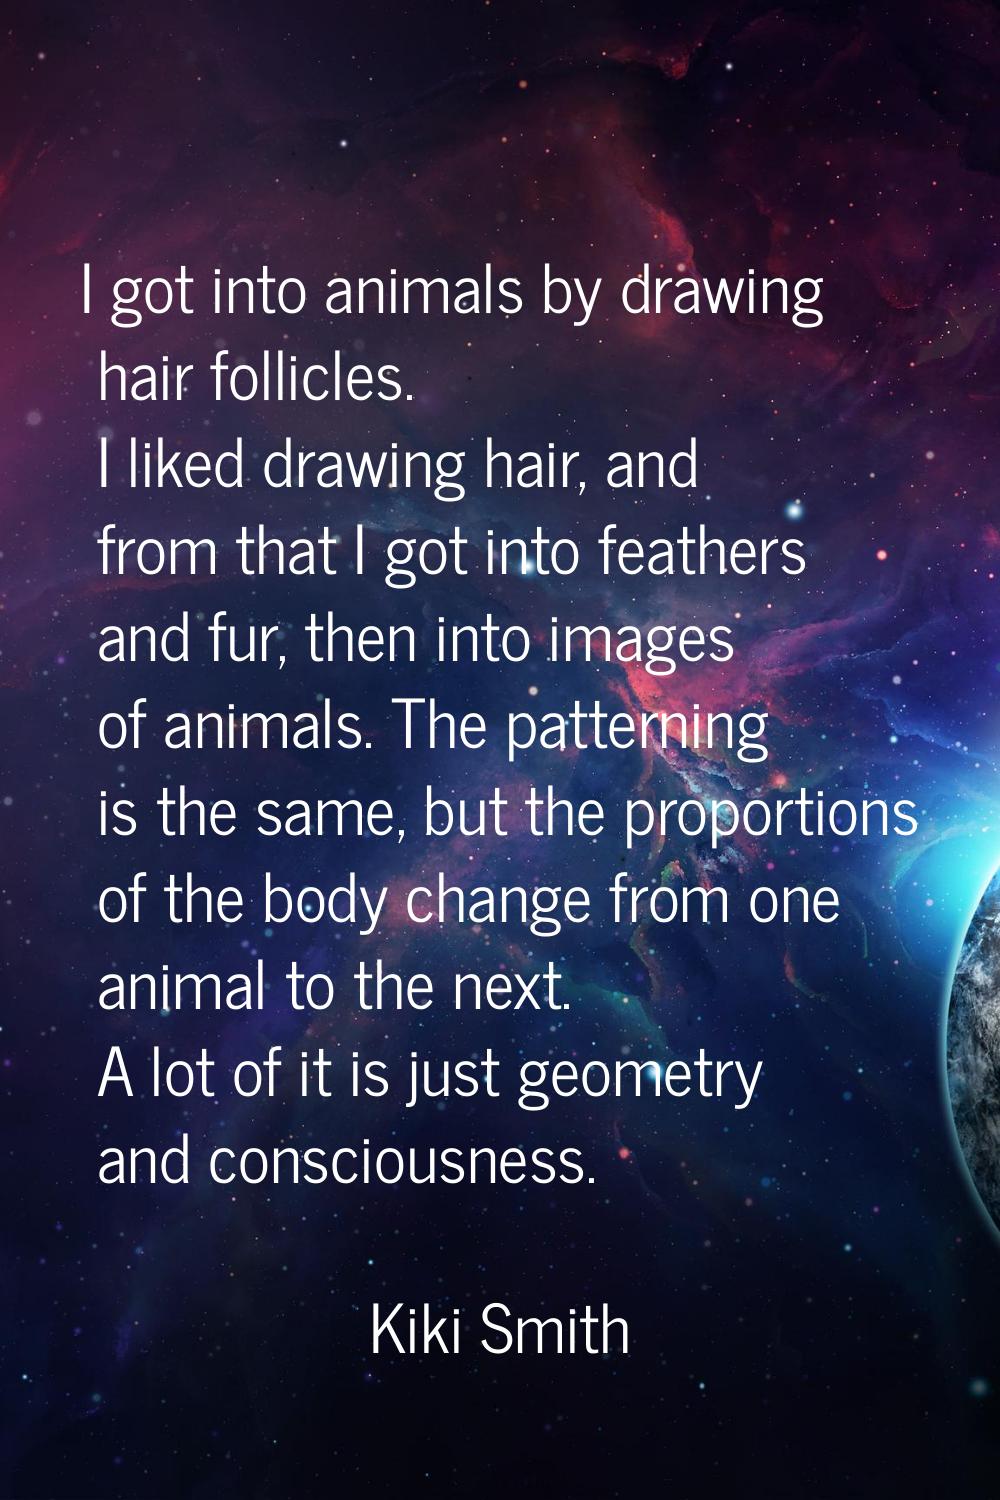 I got into animals by drawing hair follicles. I liked drawing hair, and from that I got into feathe